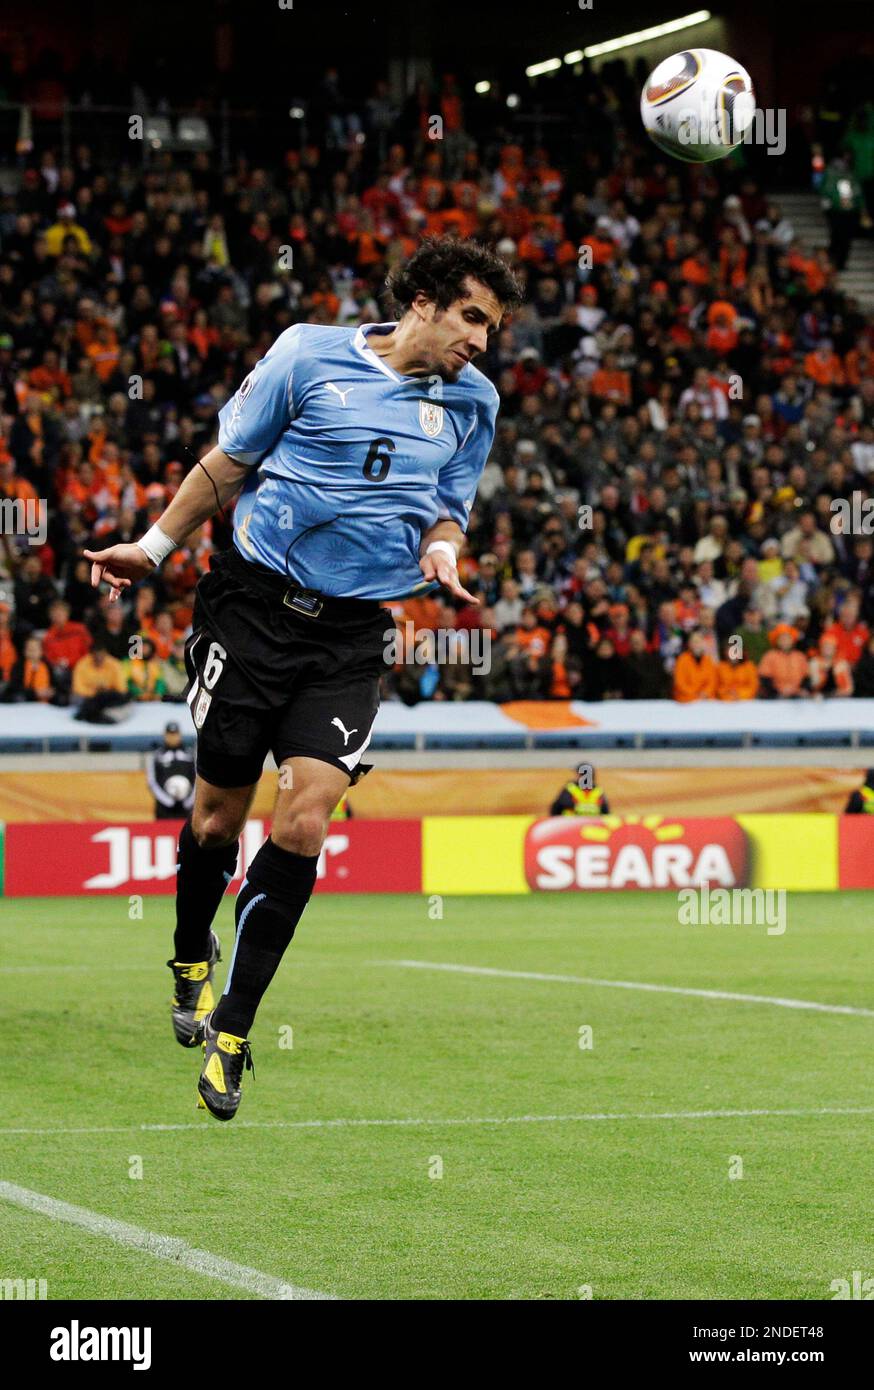 Uruguay's Mauricio Victorino during the World Cup semifinal soccer match between Uruguay and the Netherlands at the Green Point stadium in Cape Town, South Africa, Tuesday, July 6, 2010. (AP Photo/Schalk van Zuydam) Stock Photo